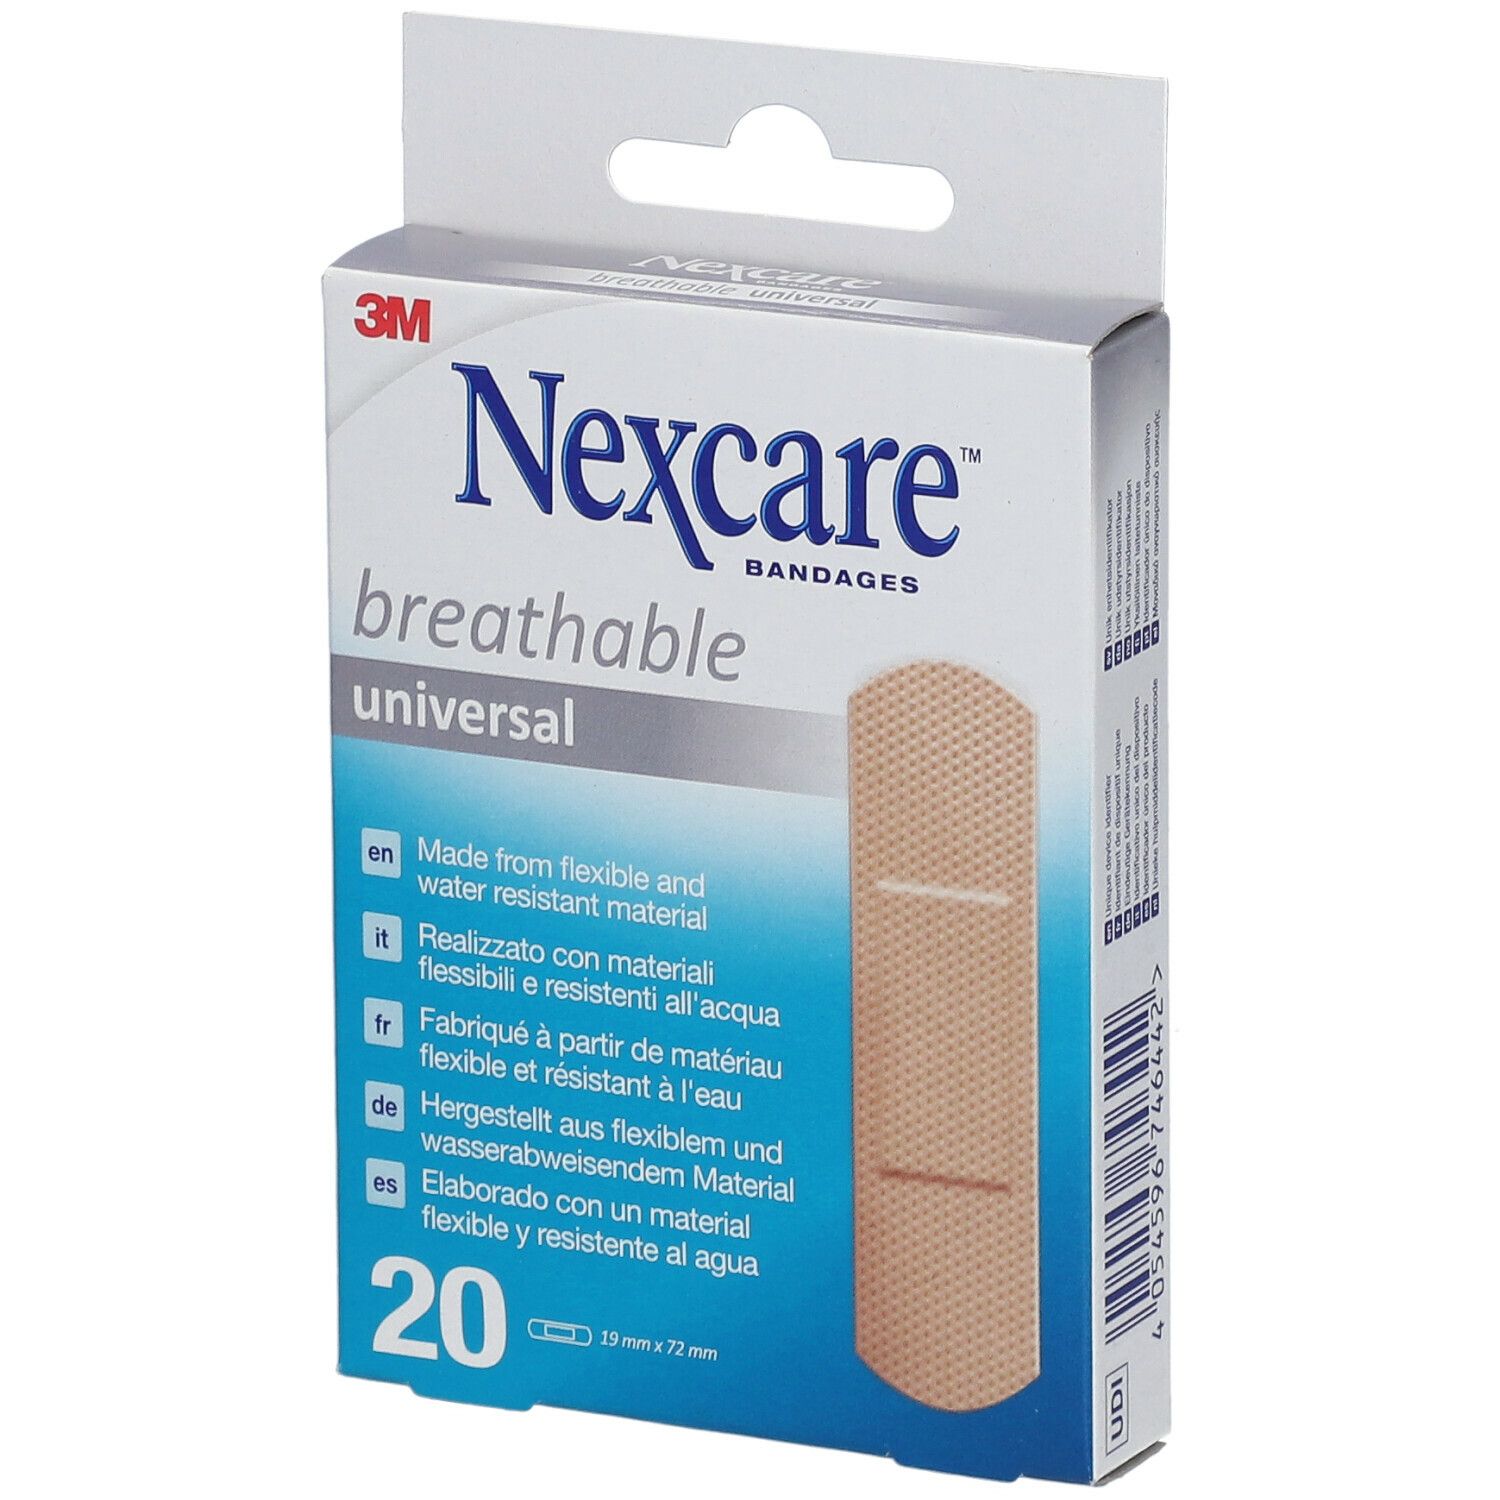 3M Nexcare™ Universal Breathable 19 x 72 mm